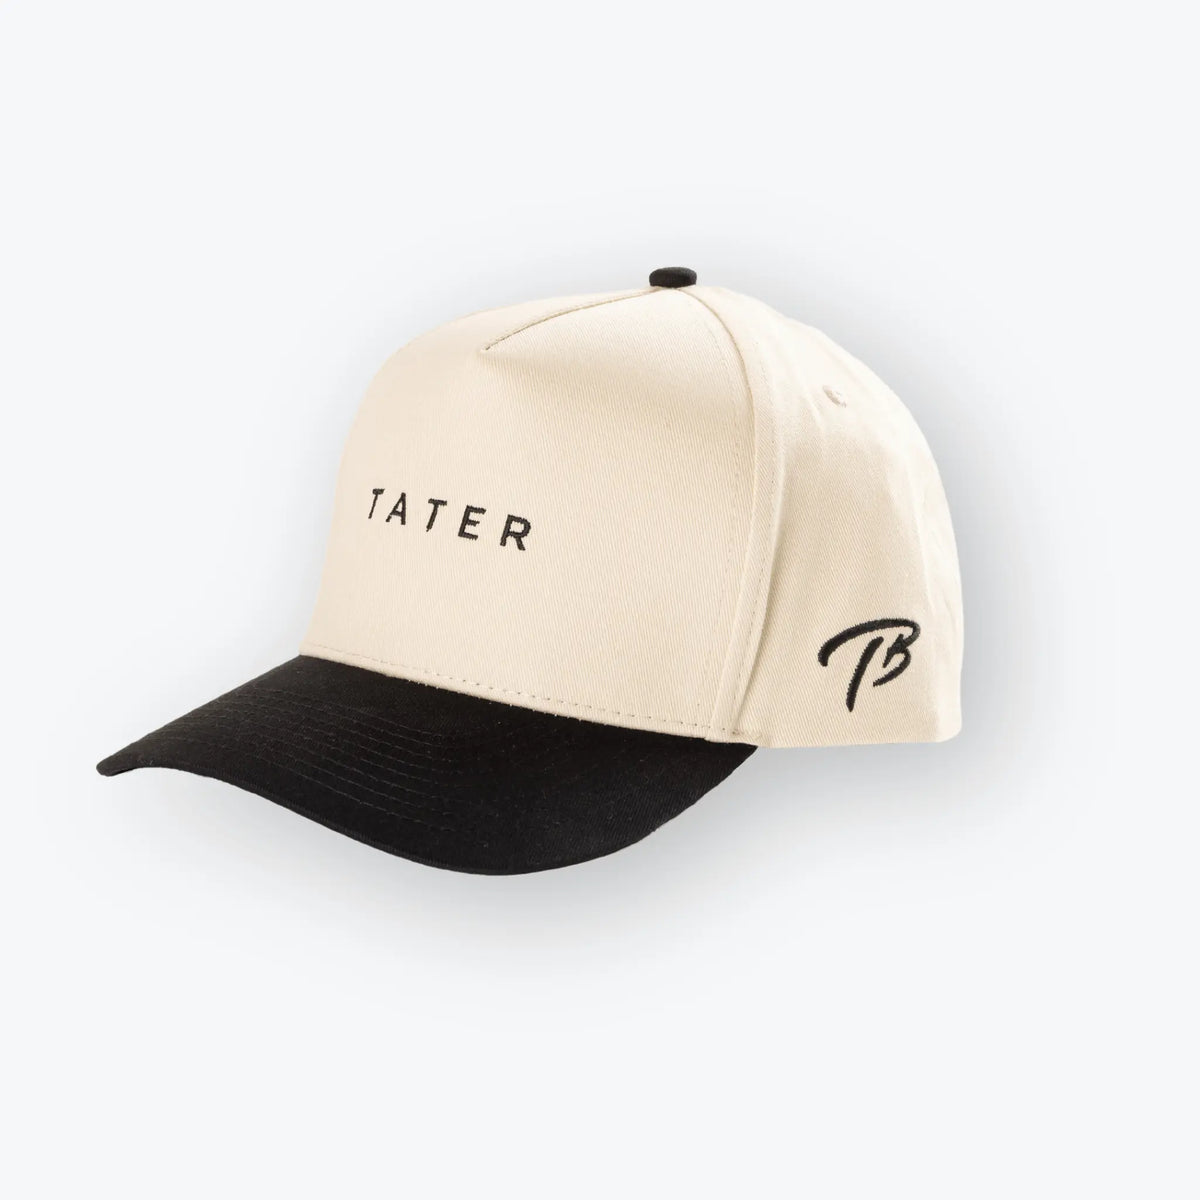 The image shows a tan and black snapback hat with the word &quot;TATER&quot; embroidered in black on the front. The Tater Baseball logo, a stylized &quot;TB,&quot; is also embroidered on the side of the hat in black. The cap&#39;s design is simple yet stylish, aligning with the aesthetics of contemporary baseball lifestyle apparel.